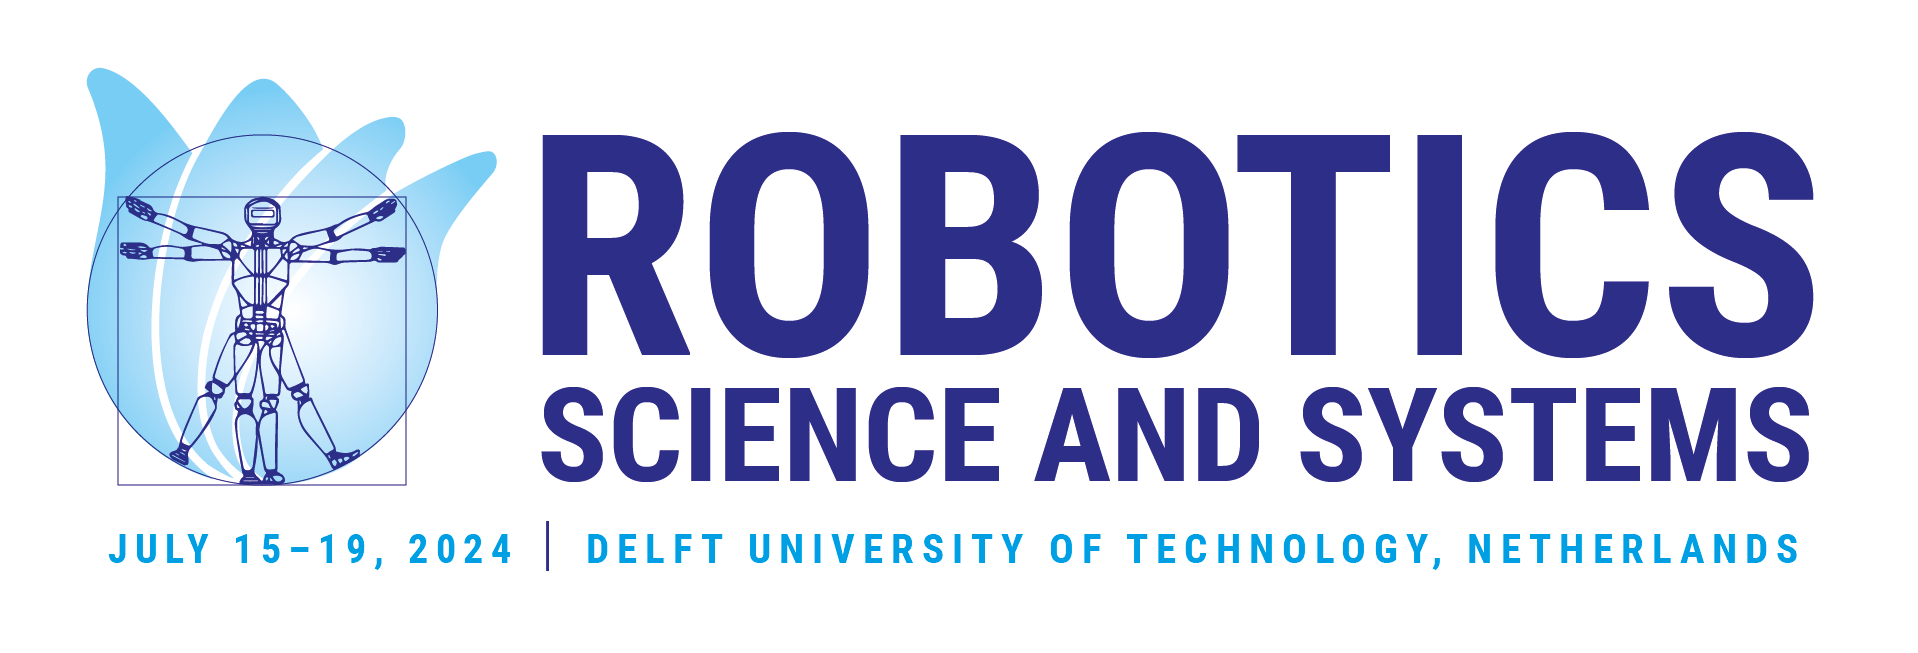 Robotics: Science and Systems 2024 Conference Logo